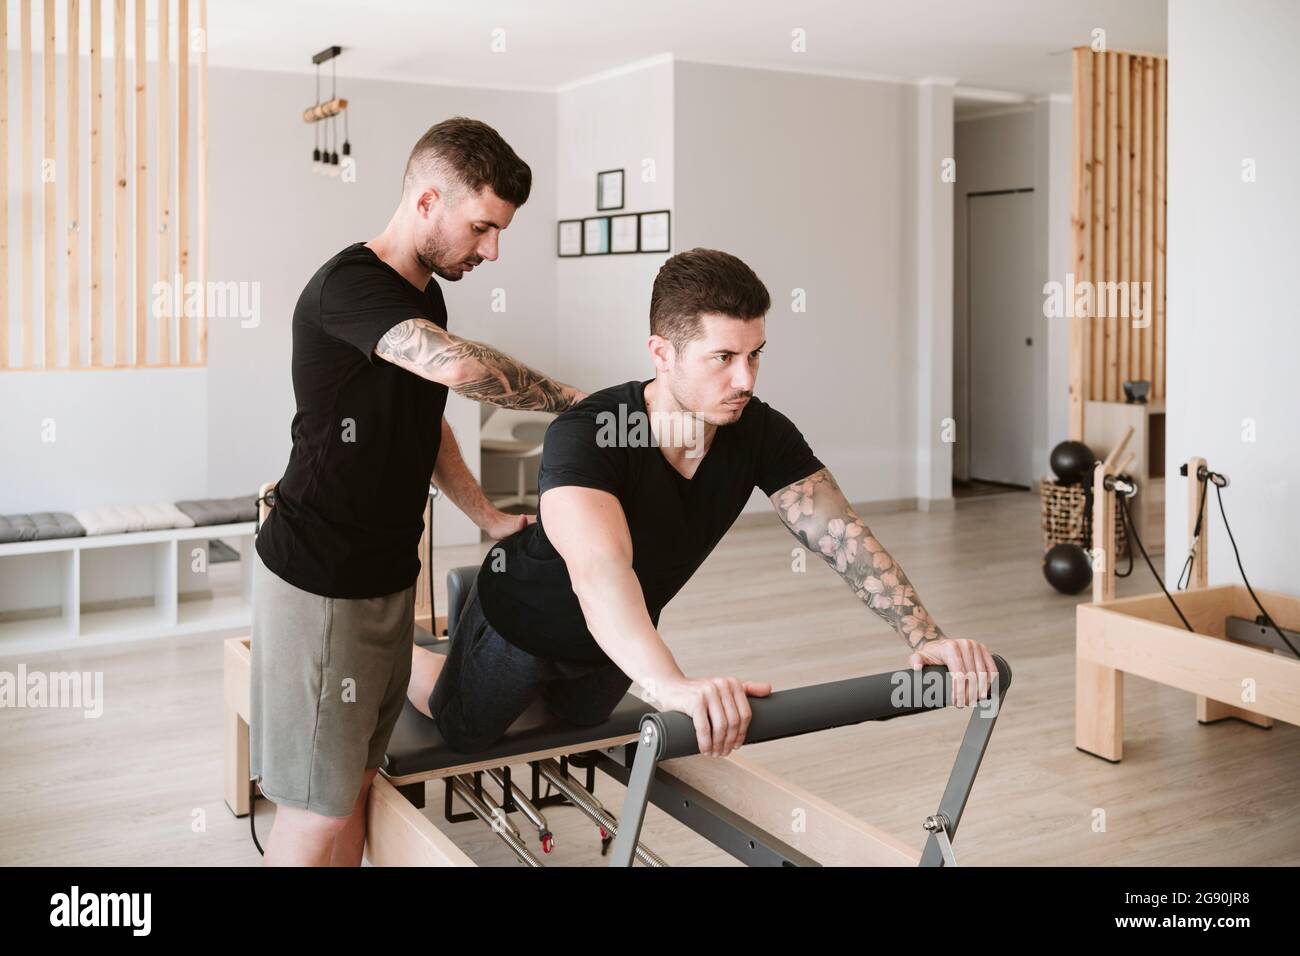 Male fitness trainer providing support while man practicing pilates in studio Stock Photo